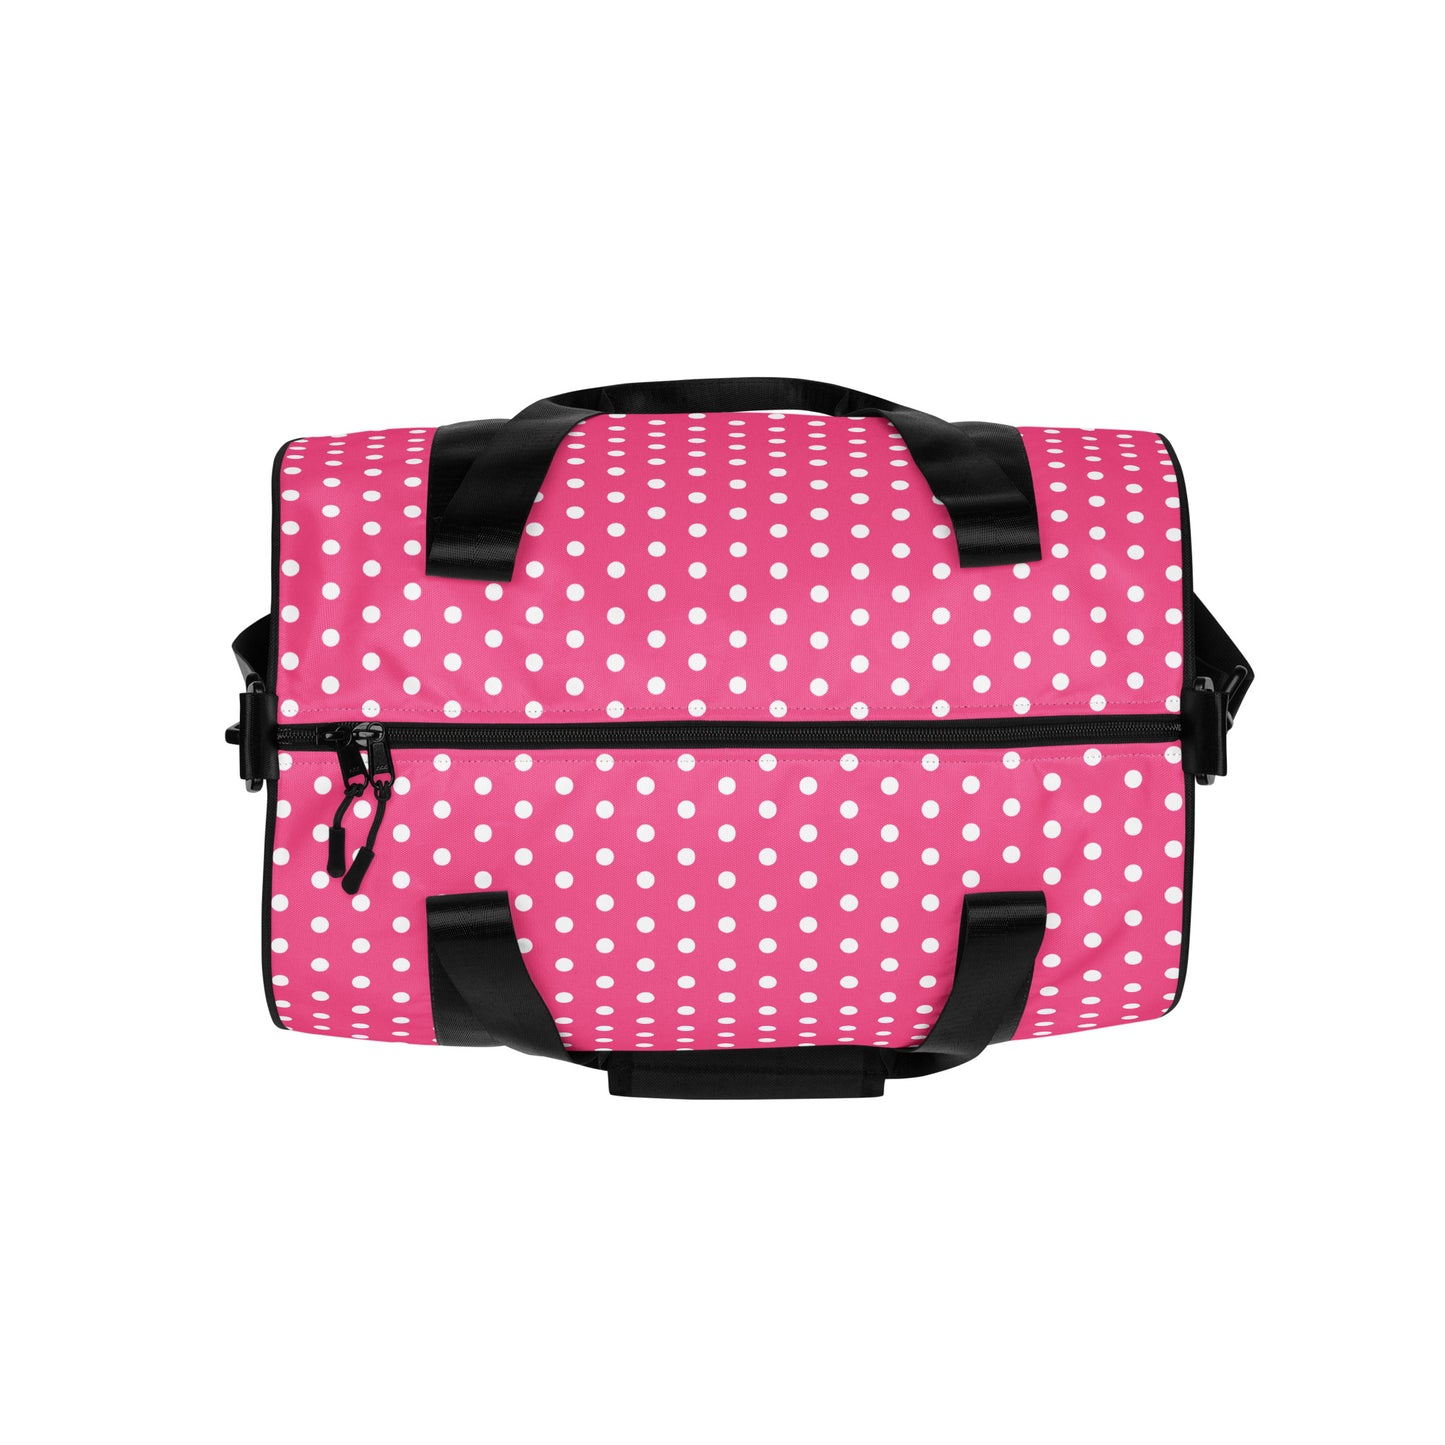 Pink Polkadot - Inspired By Harry Styles - Sustainably Made gym bag